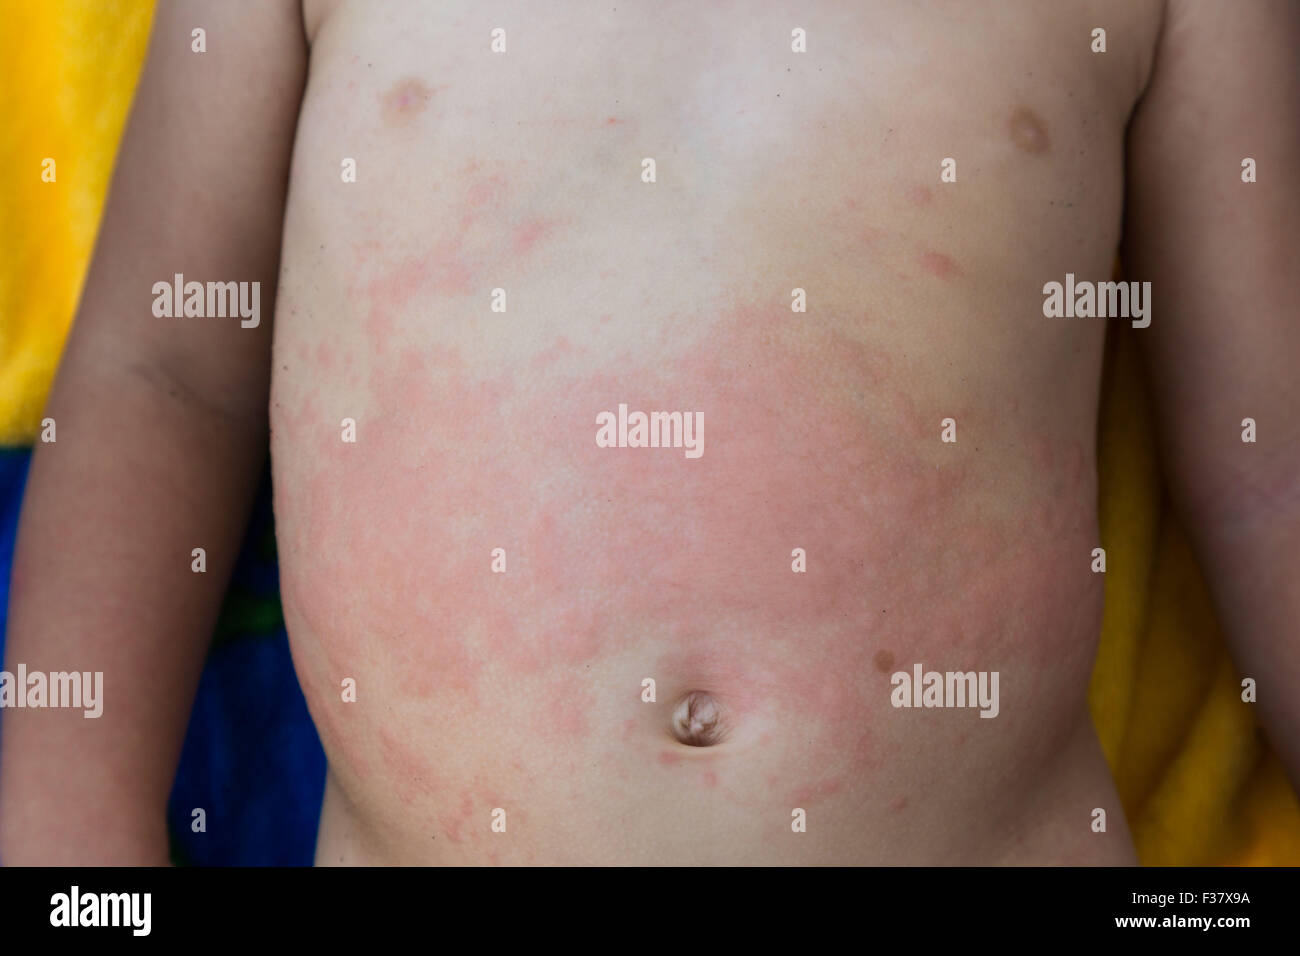 Rash from allergy on the torse of a 2 year old baby. Stock Photo